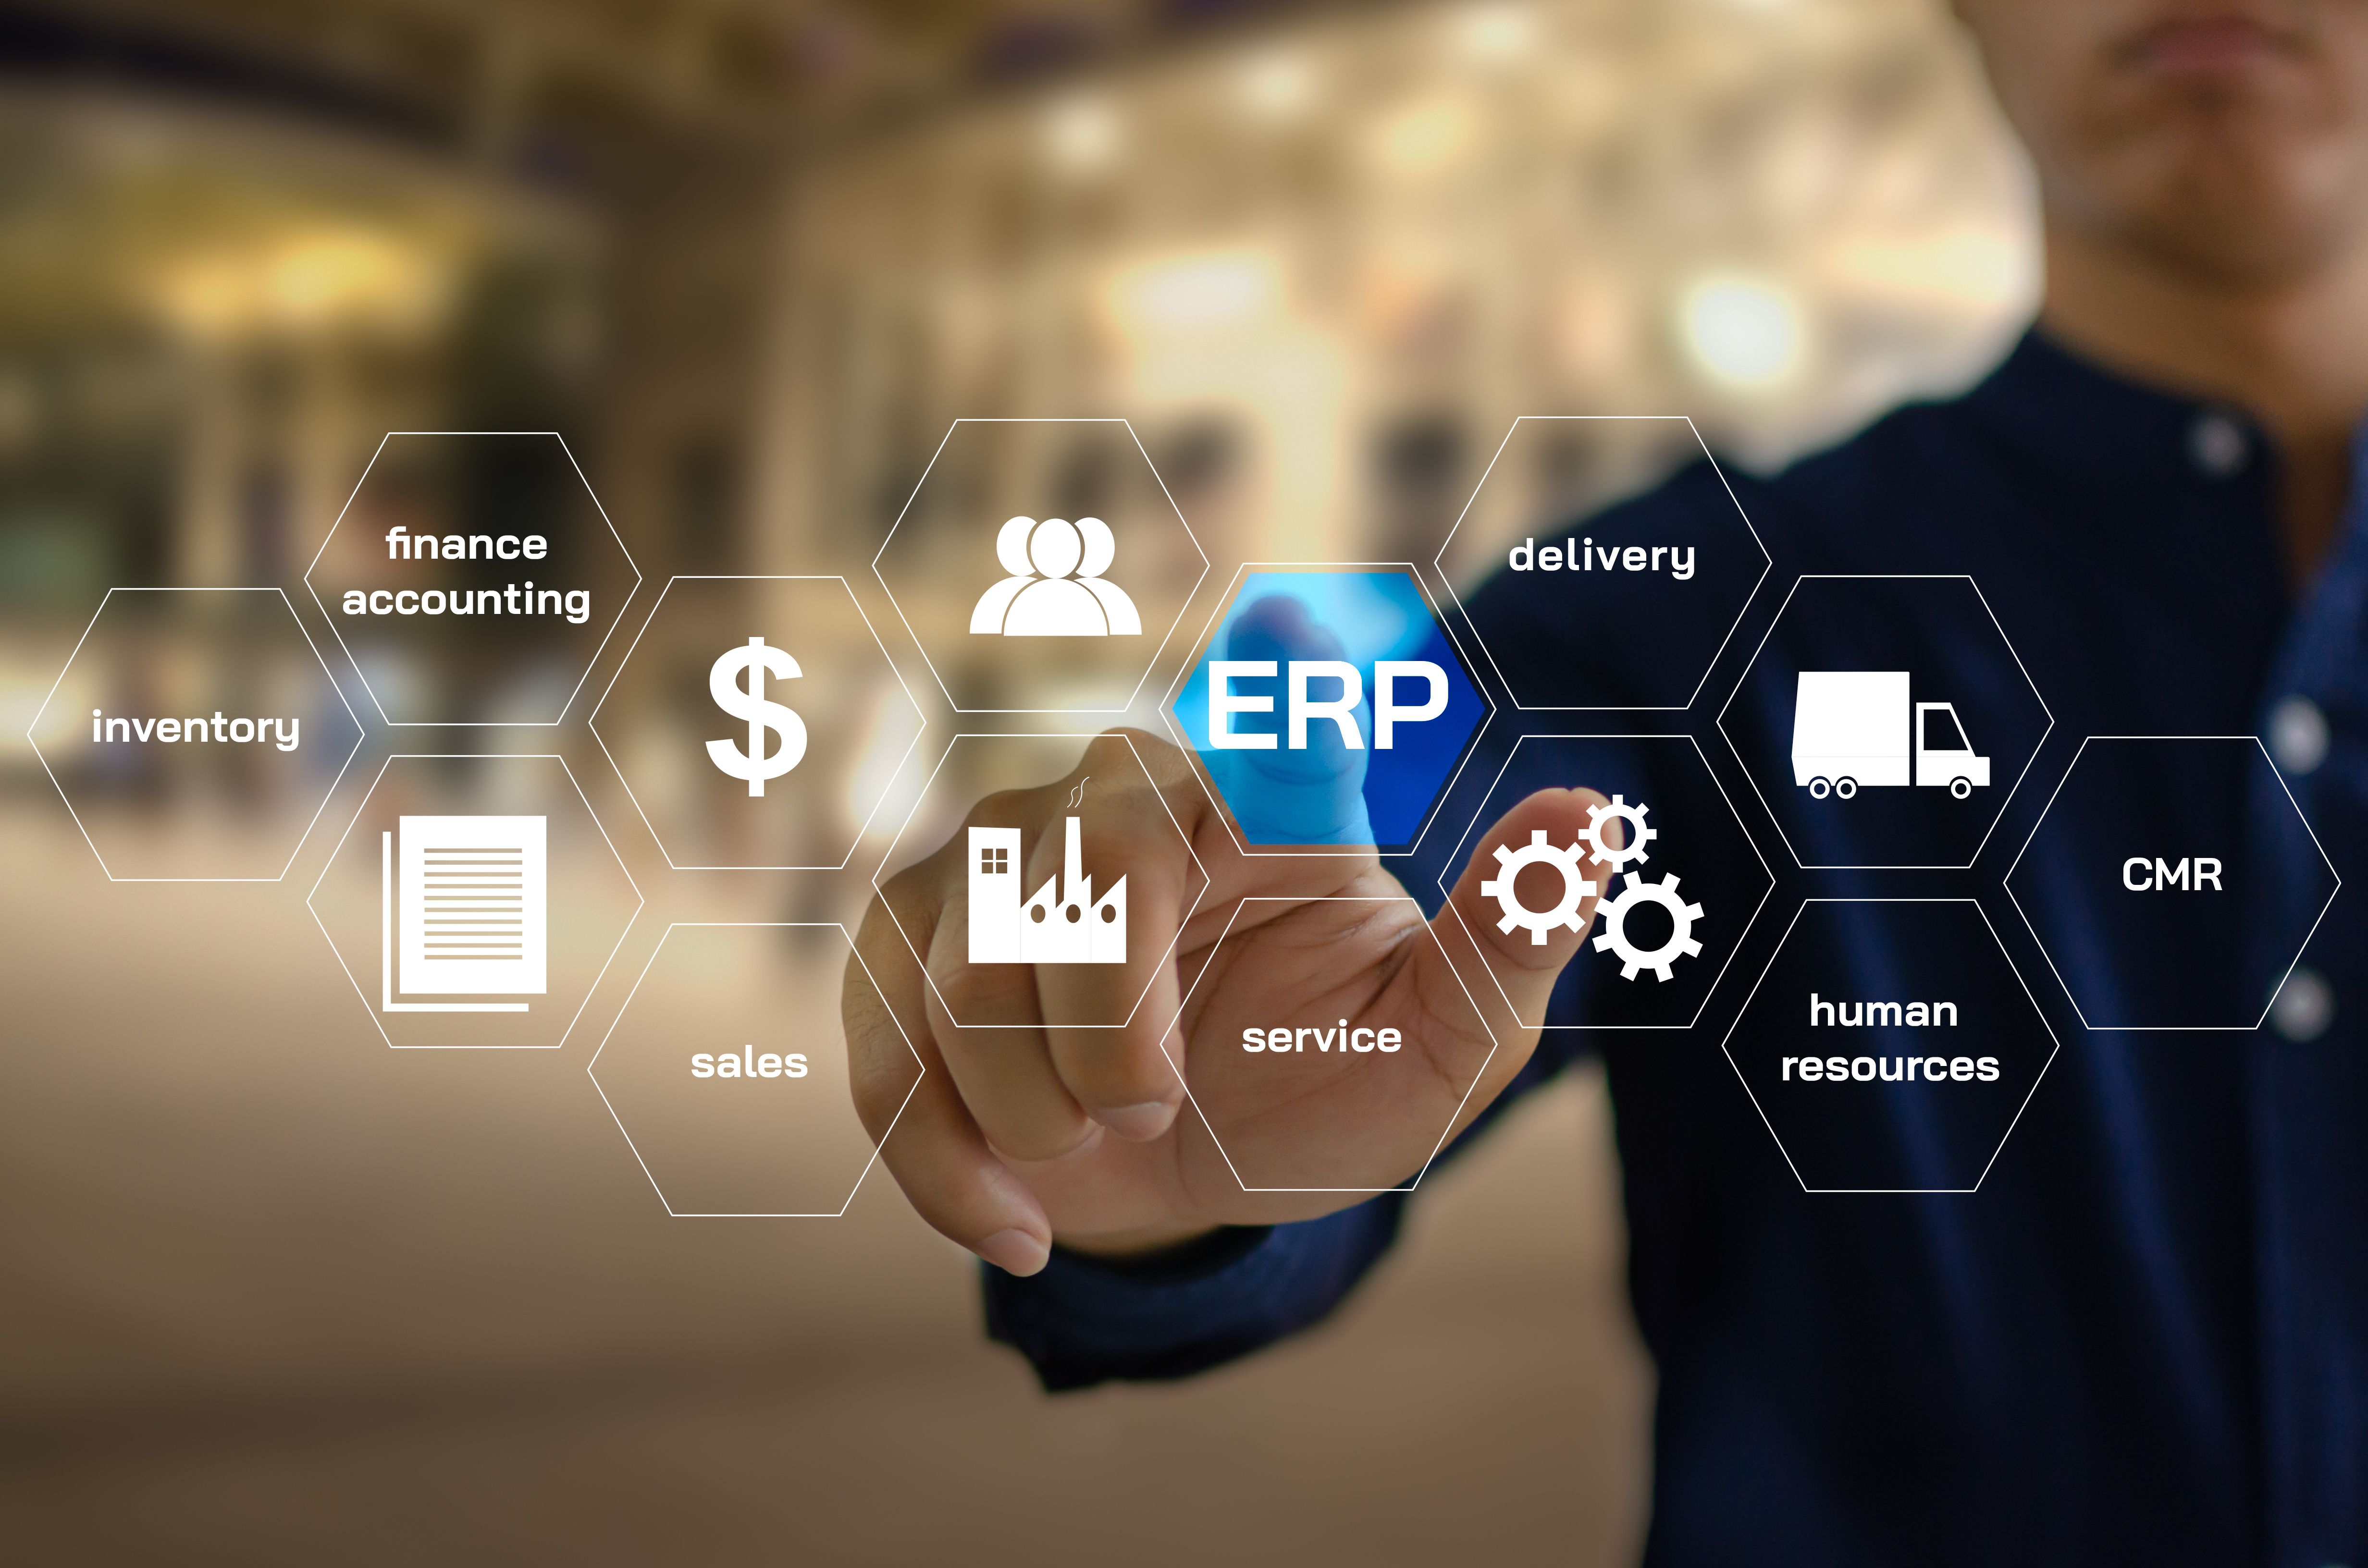 erp-enterprise-resource-planning-planning-manage-organization-be-able-use-resources-efficiently-maximum-benefit-management-concept-icons-virtual-screen.